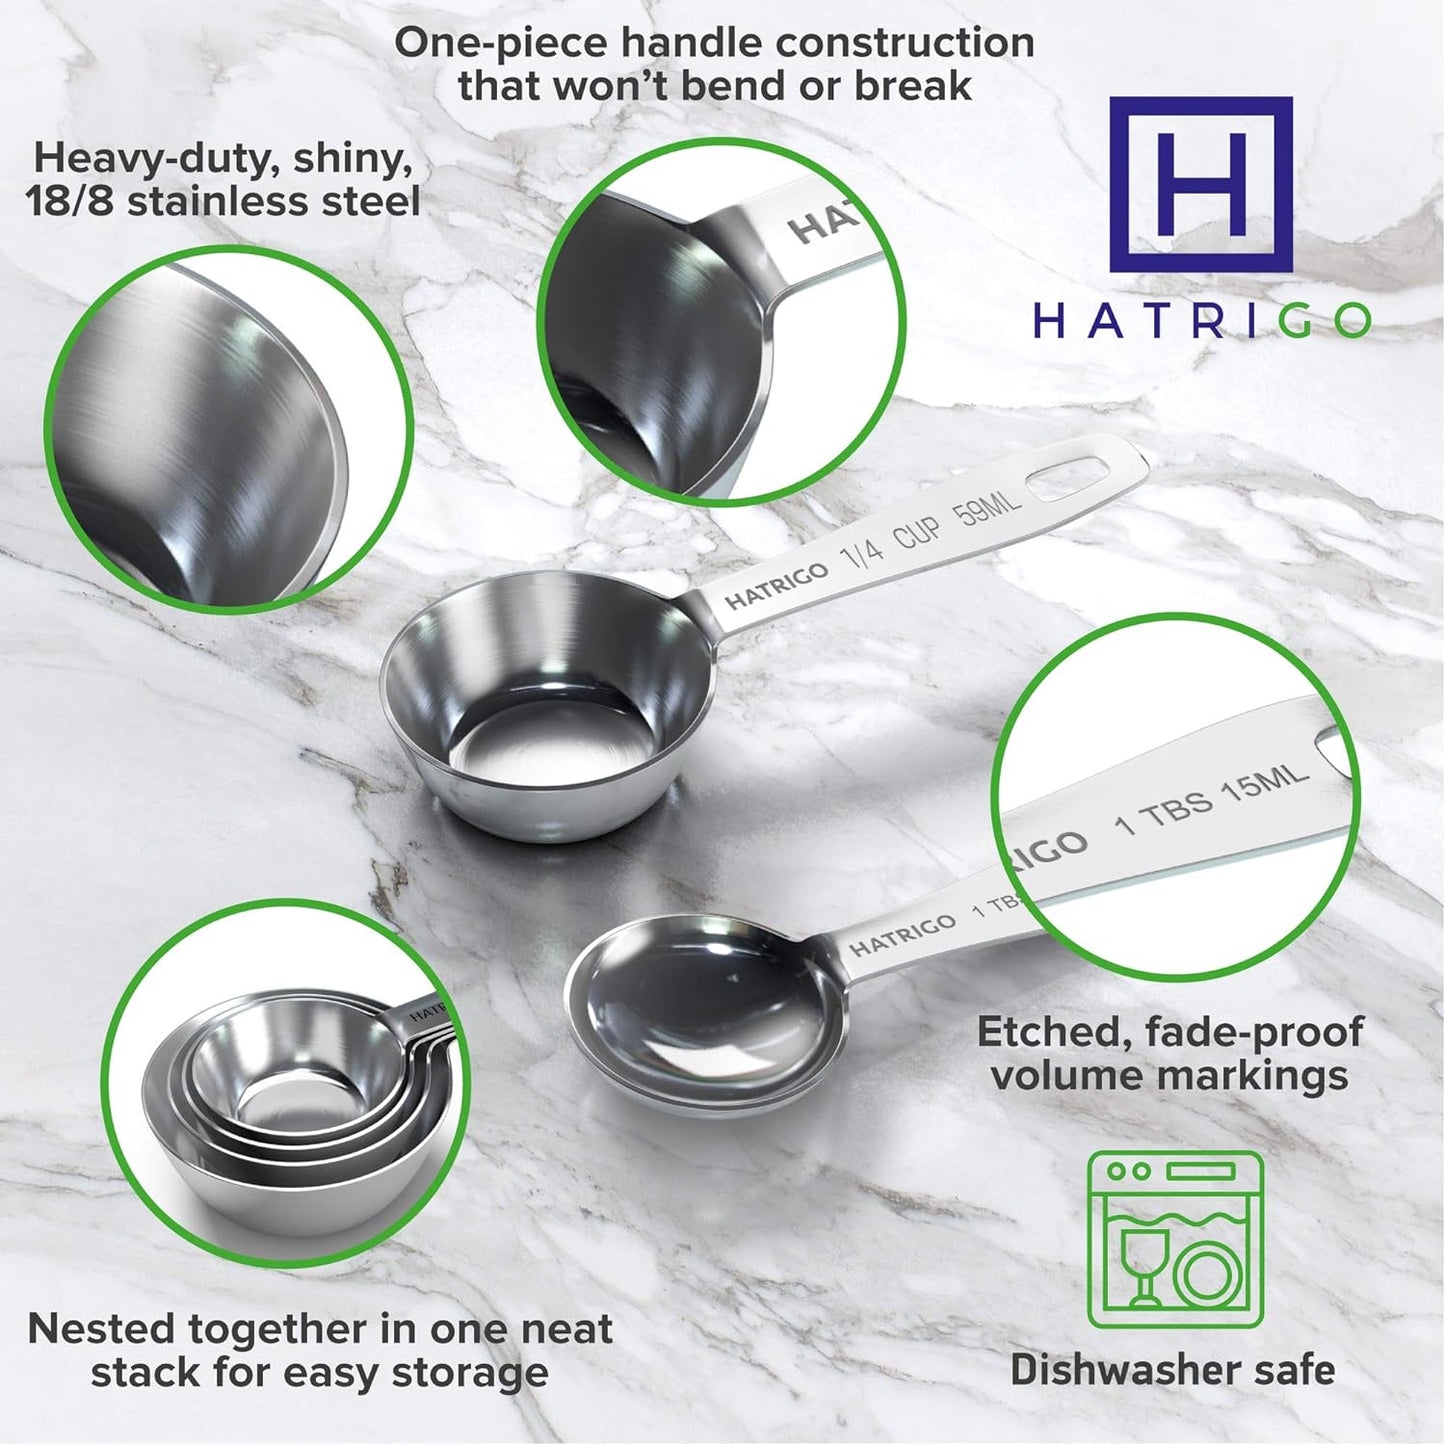 Heavy Duty Professional Stainless Steel Measuring Cups and Spoons Set of 8 with One Solid Piece Construction (No Welded Handles), Heavy Duty Thick Steel, Built to Last a Lifetime